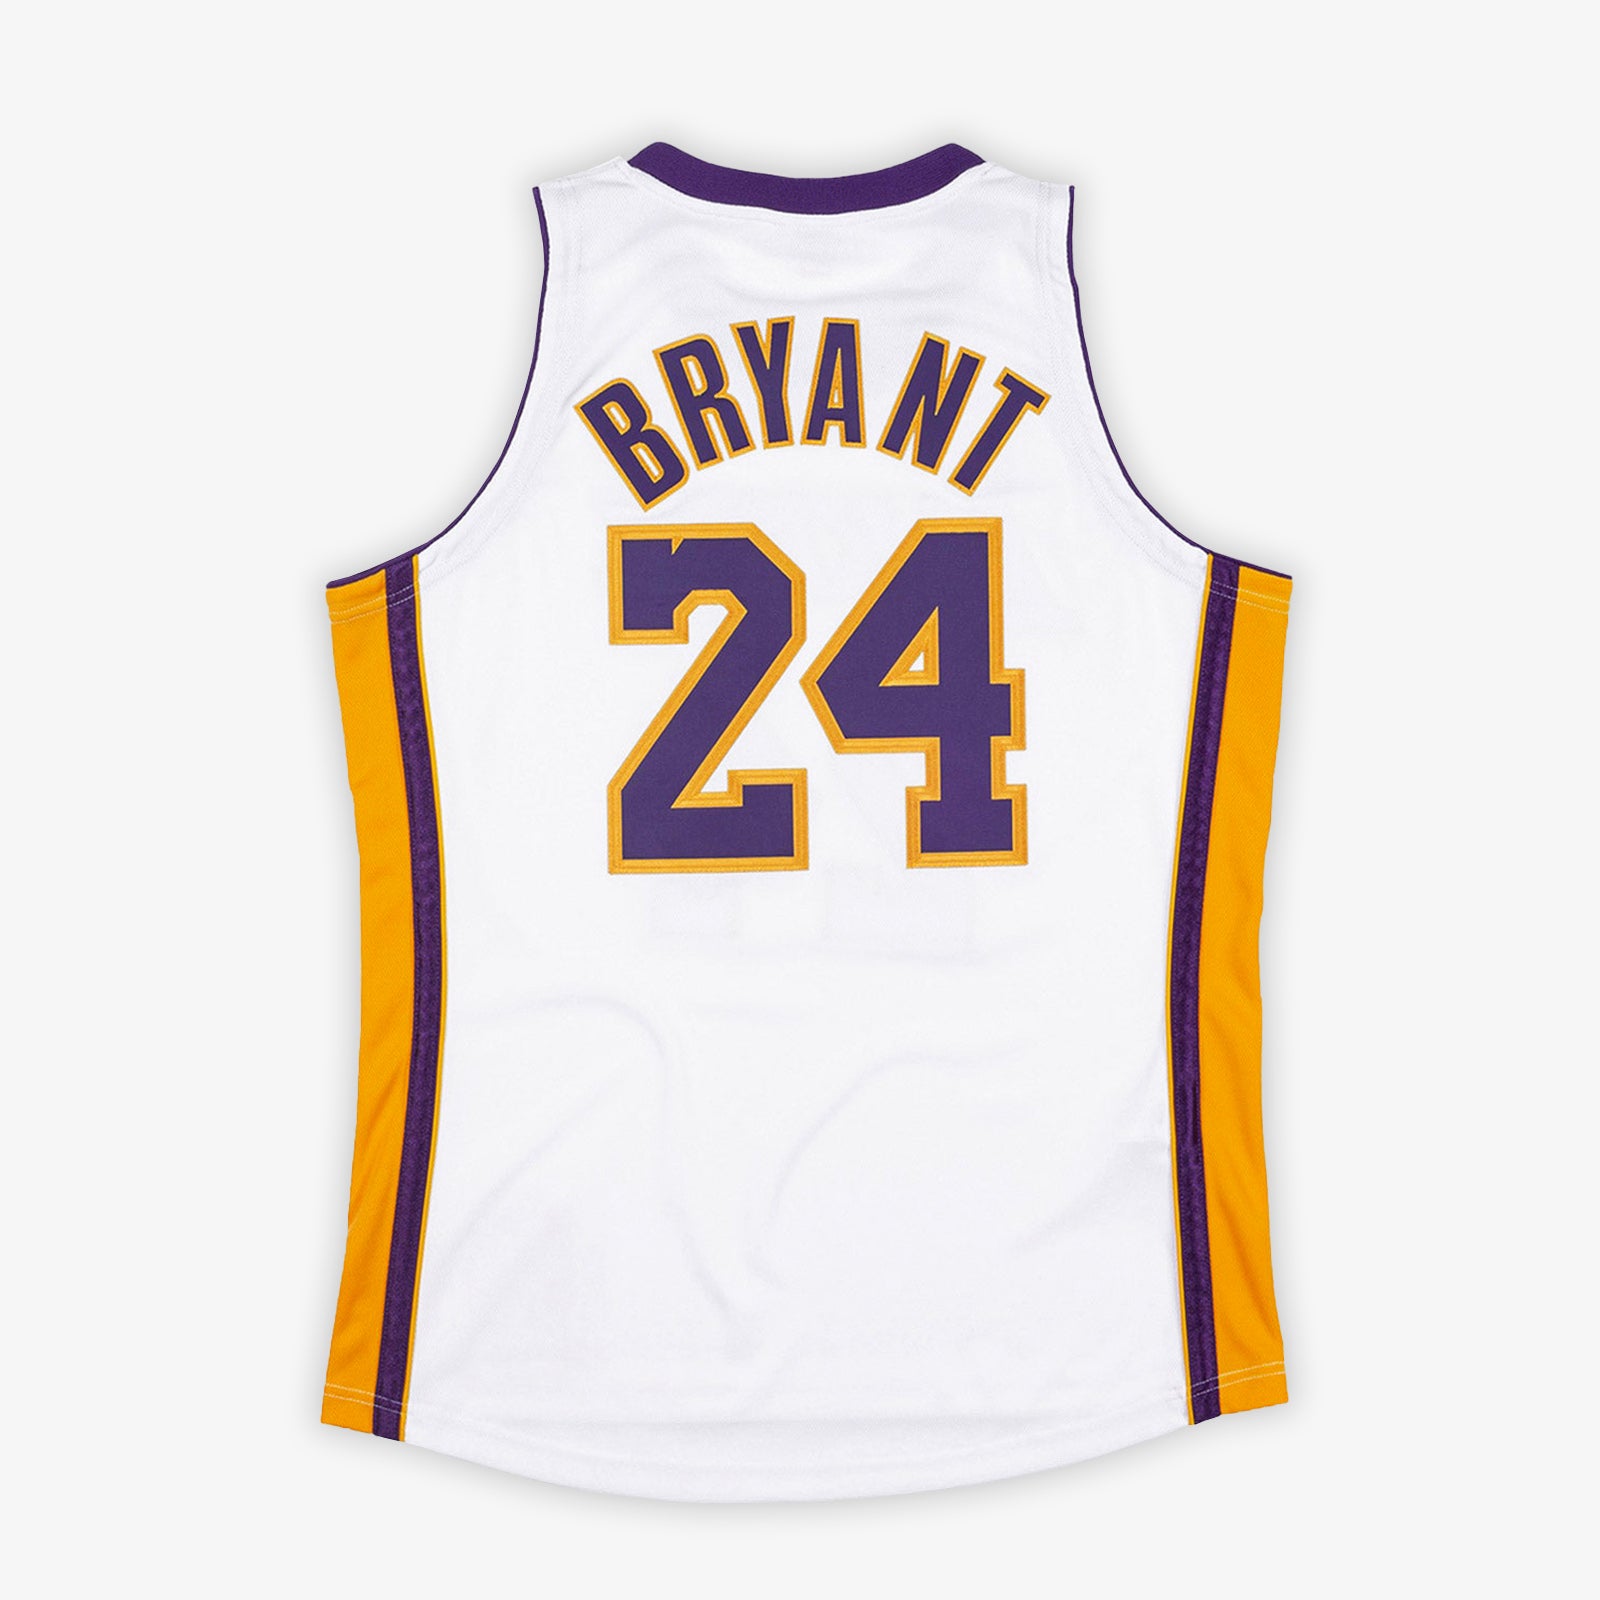 Los Angeles Lakers Alternate Swingman Jerseys: What's available